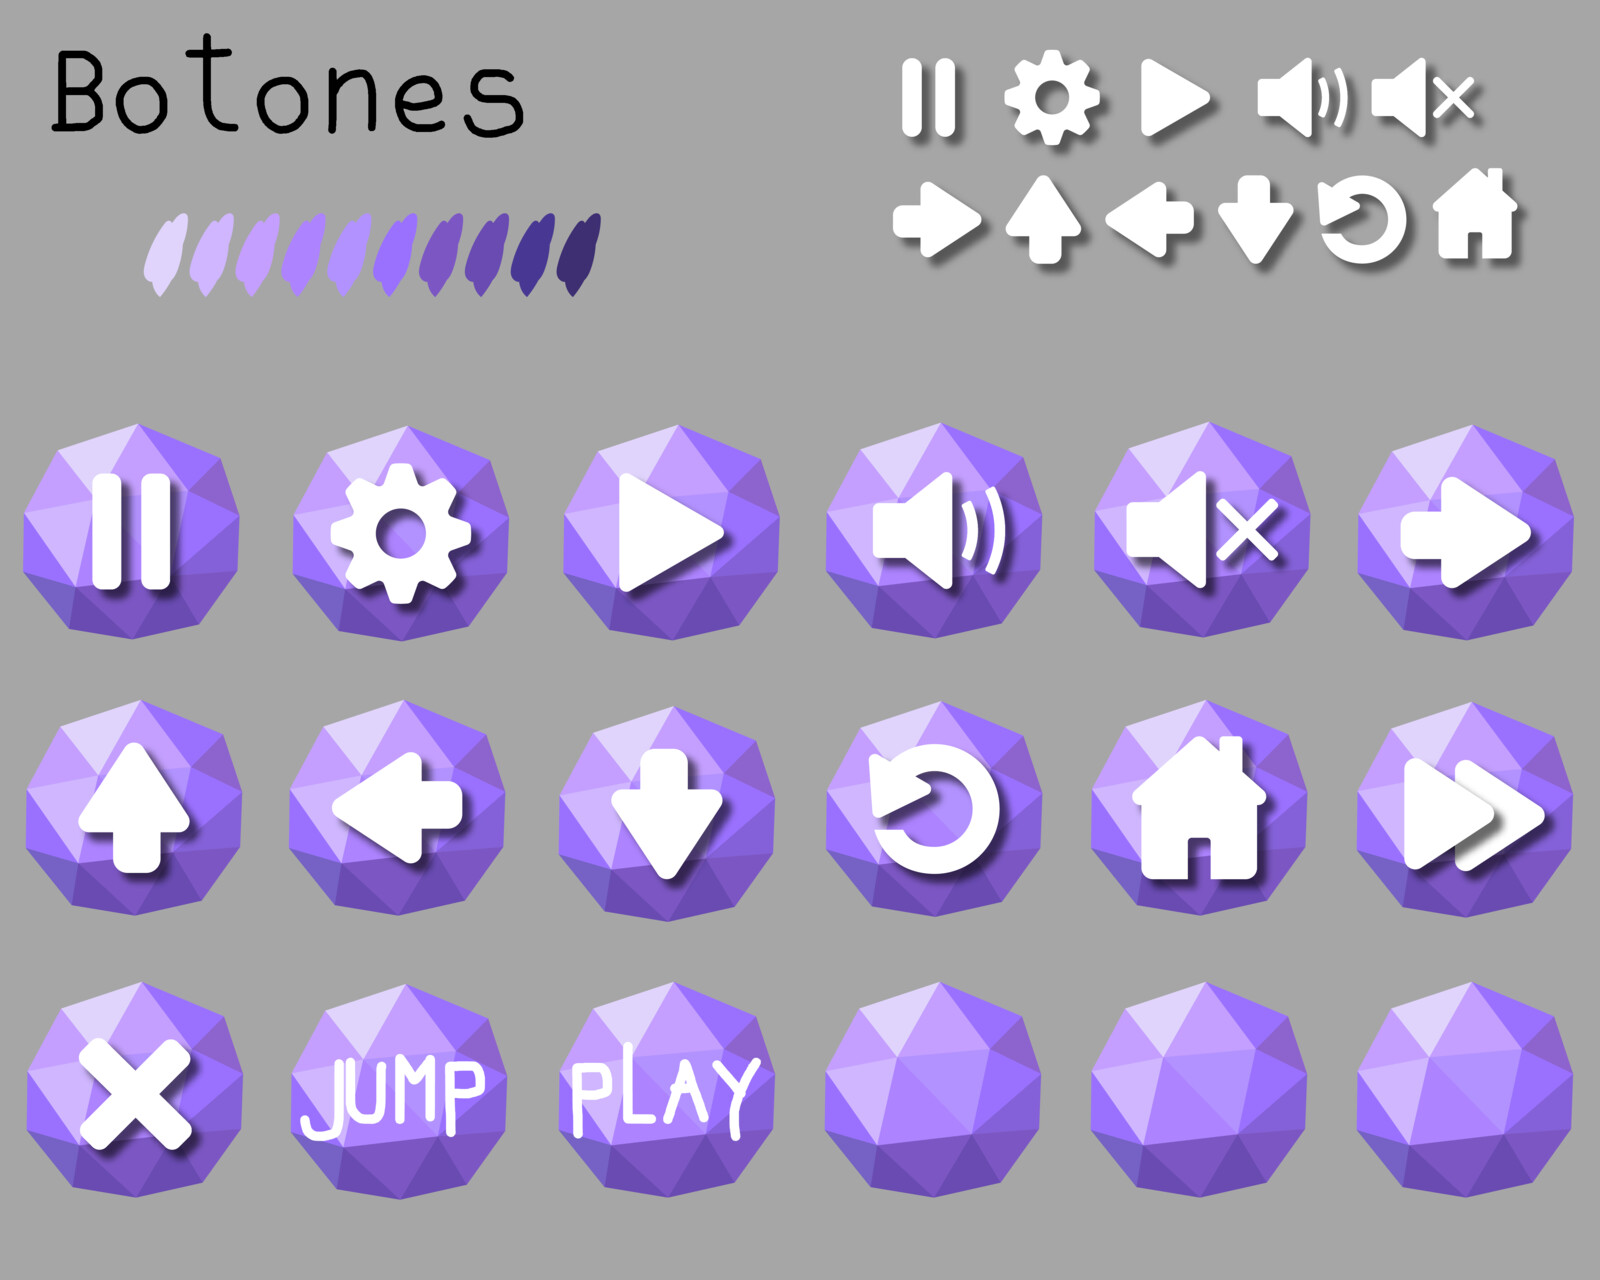 Buttons for controls/menu